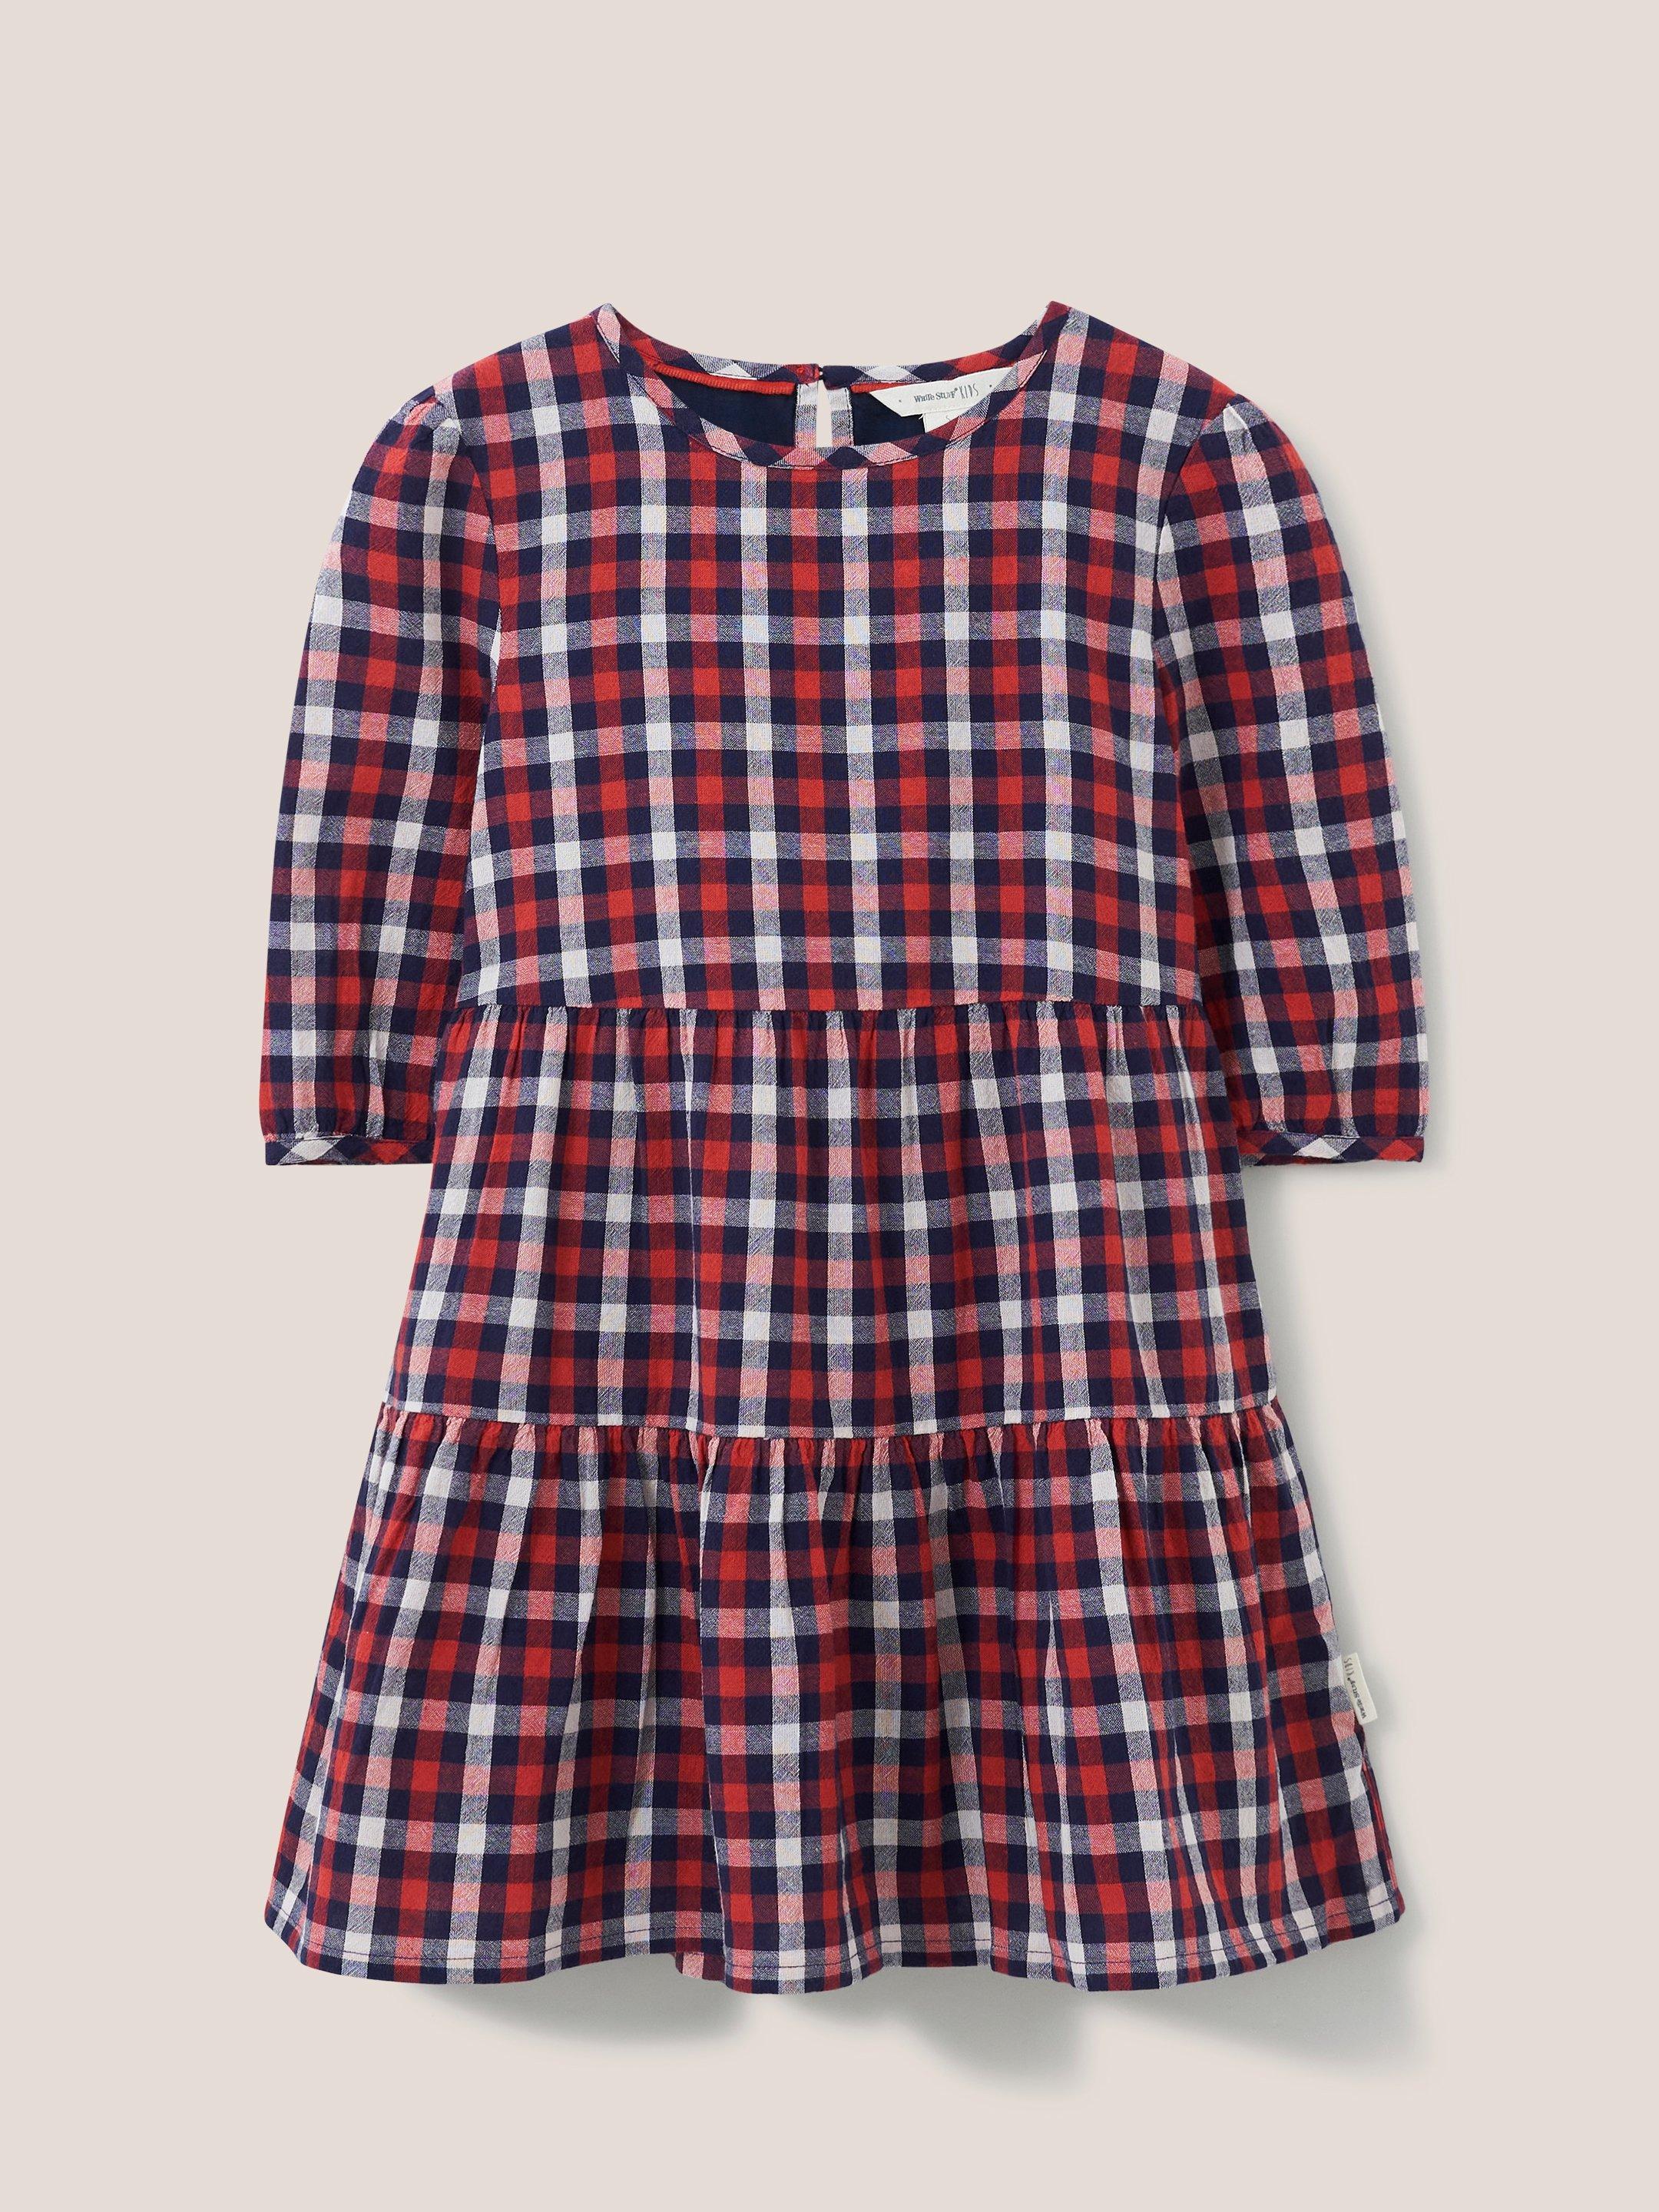 Chloe Gingham Dress in PINK MLT - FLAT FRONT